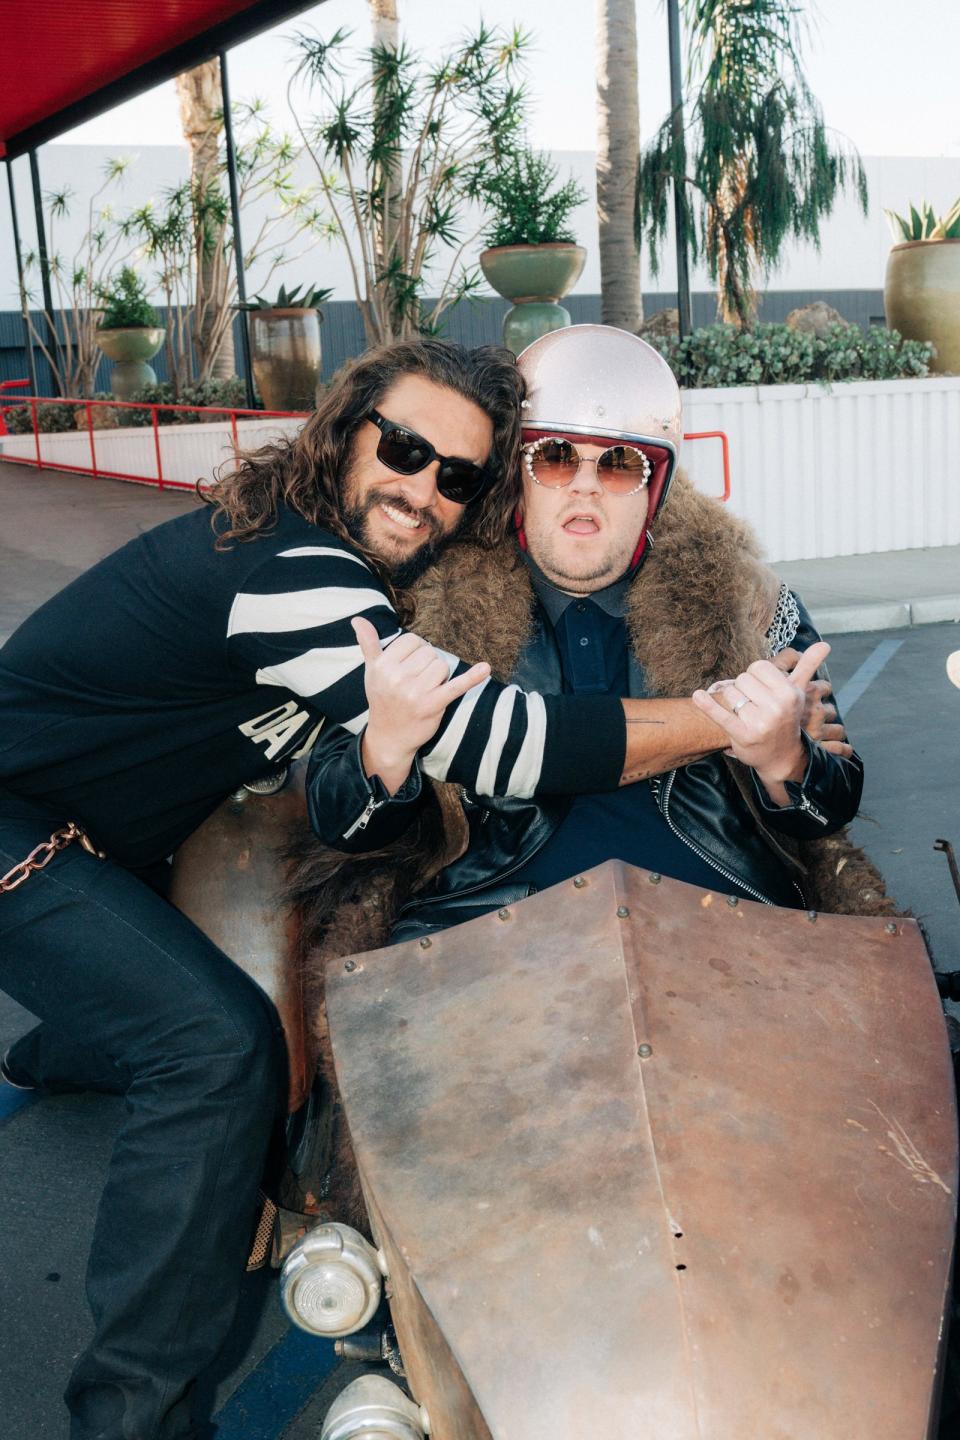 Jason Momoa takes host James Corden for a ride in his side car during the sketch "Two Hours Off" on <em>The Late Late Show </em>on Wednesday in Los Angeles.